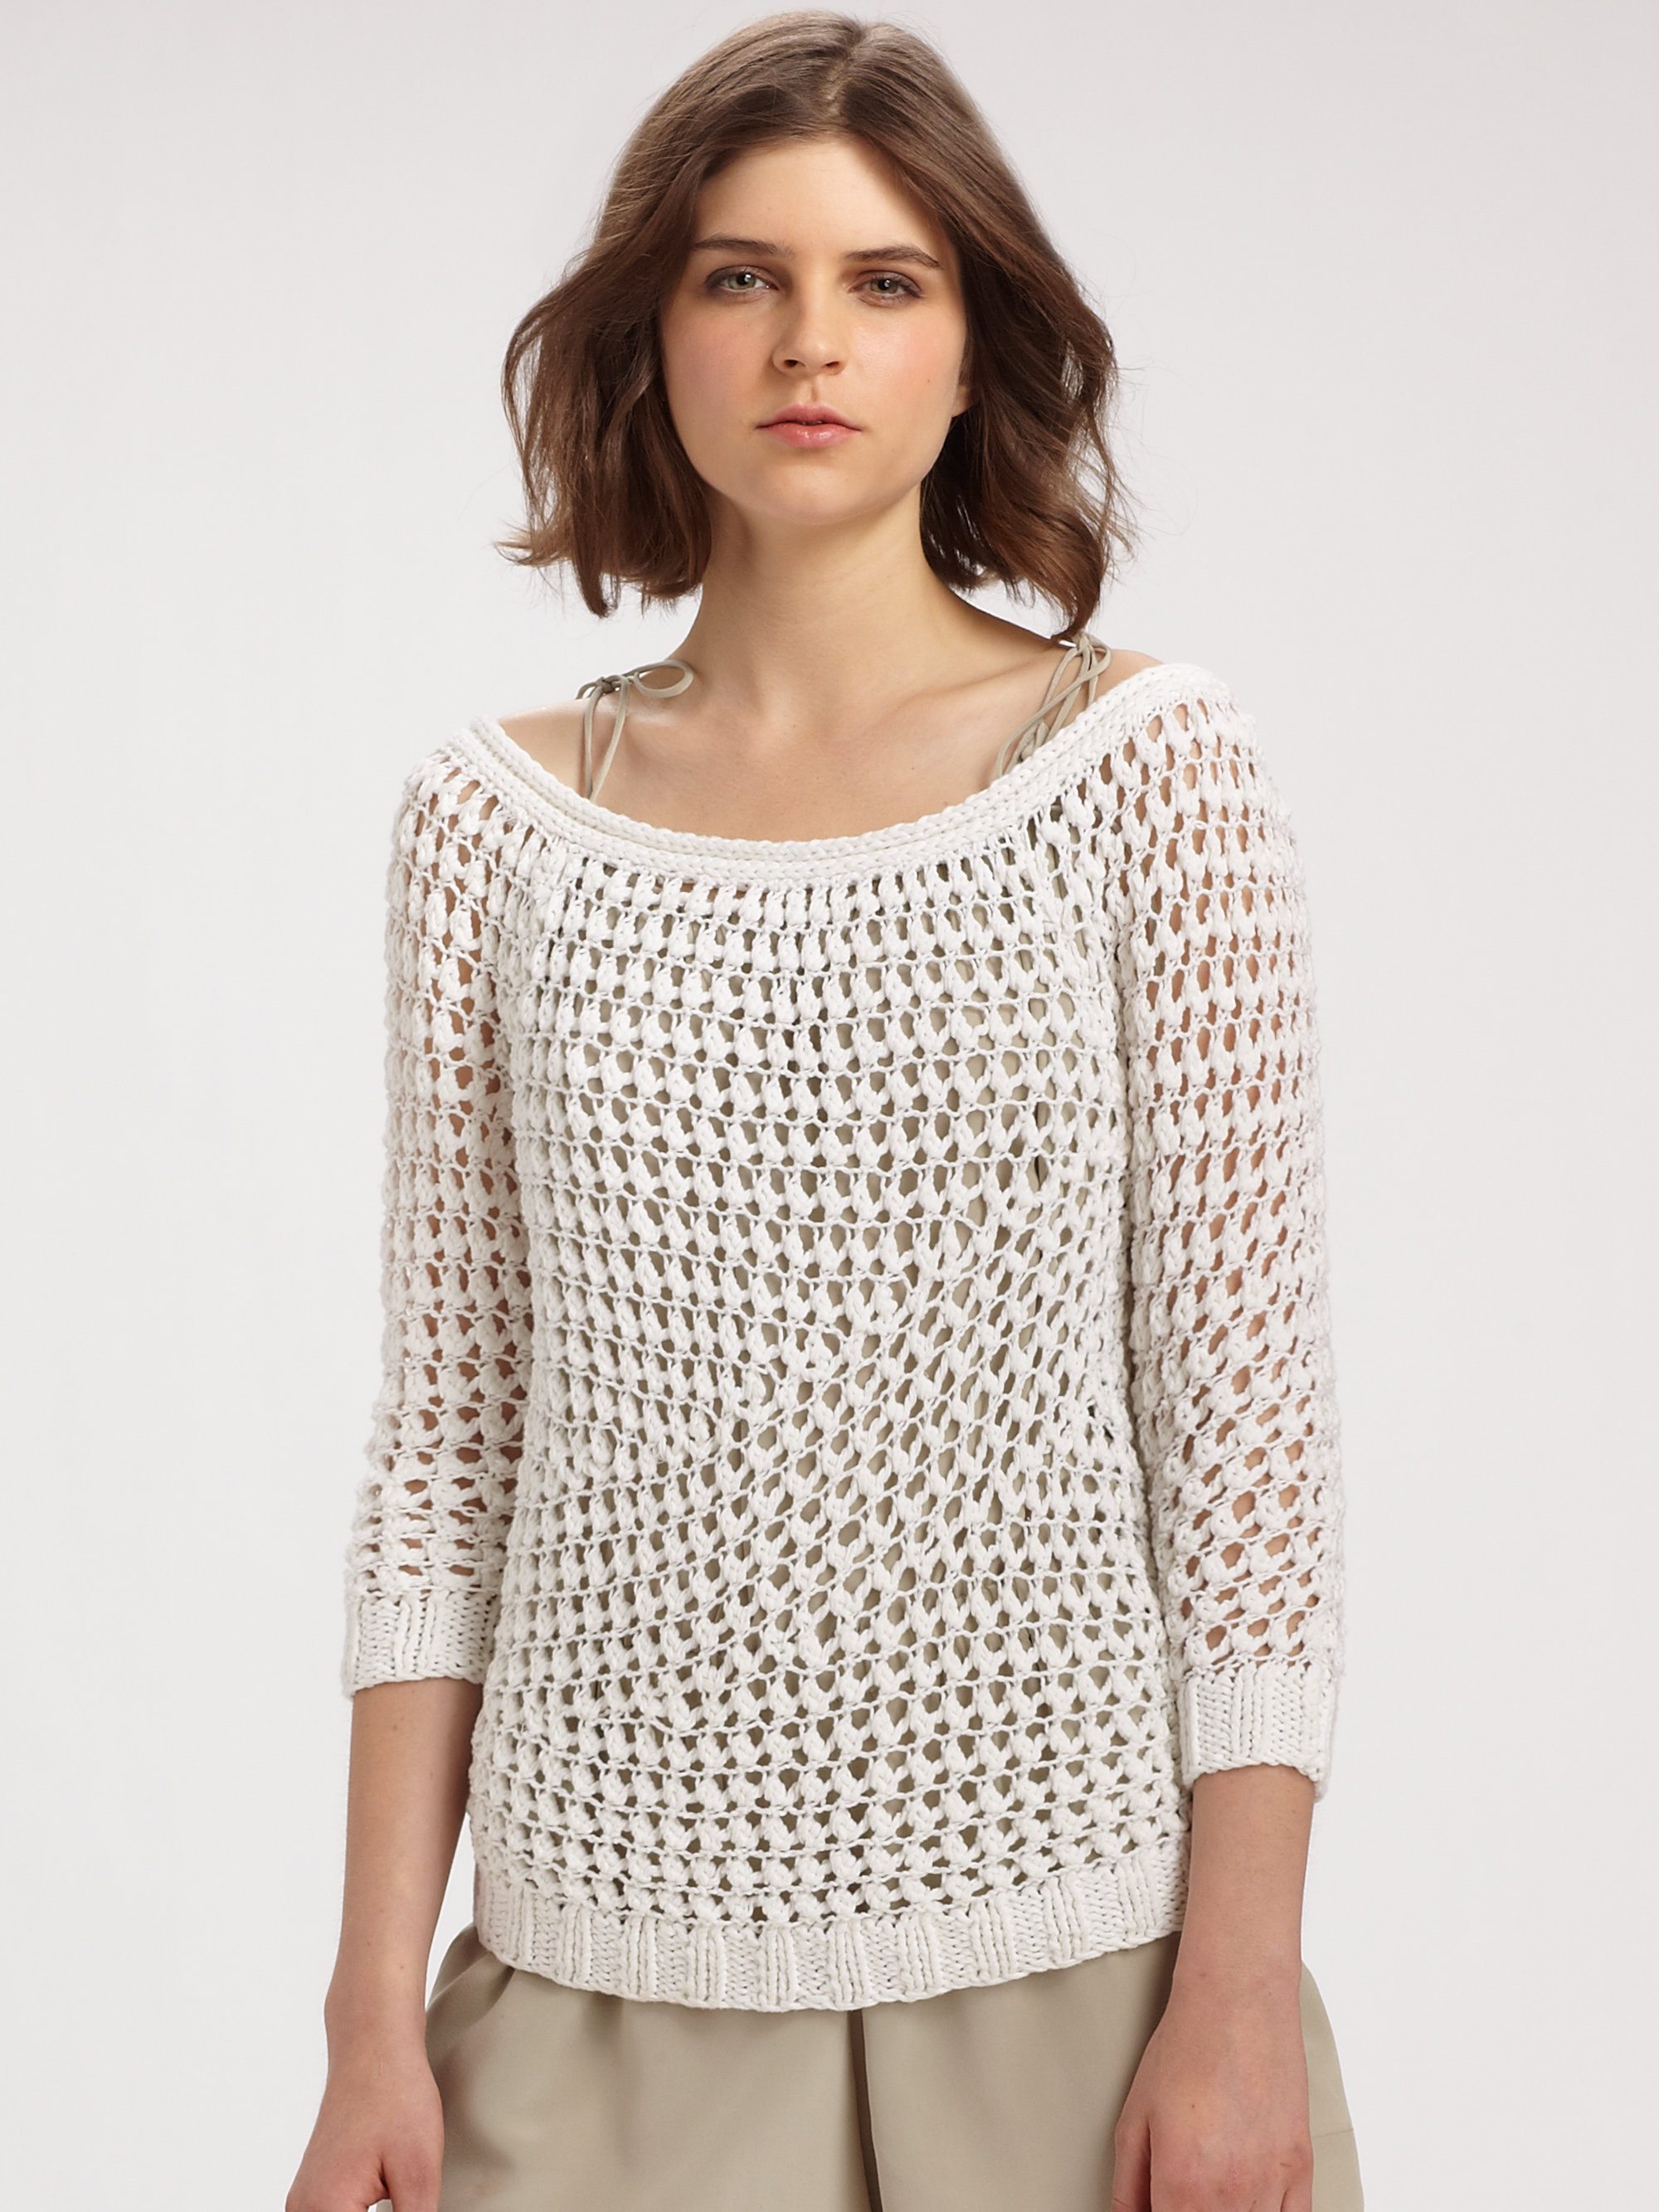 Lyst - Theory Nimue Crocheted Sweater in White